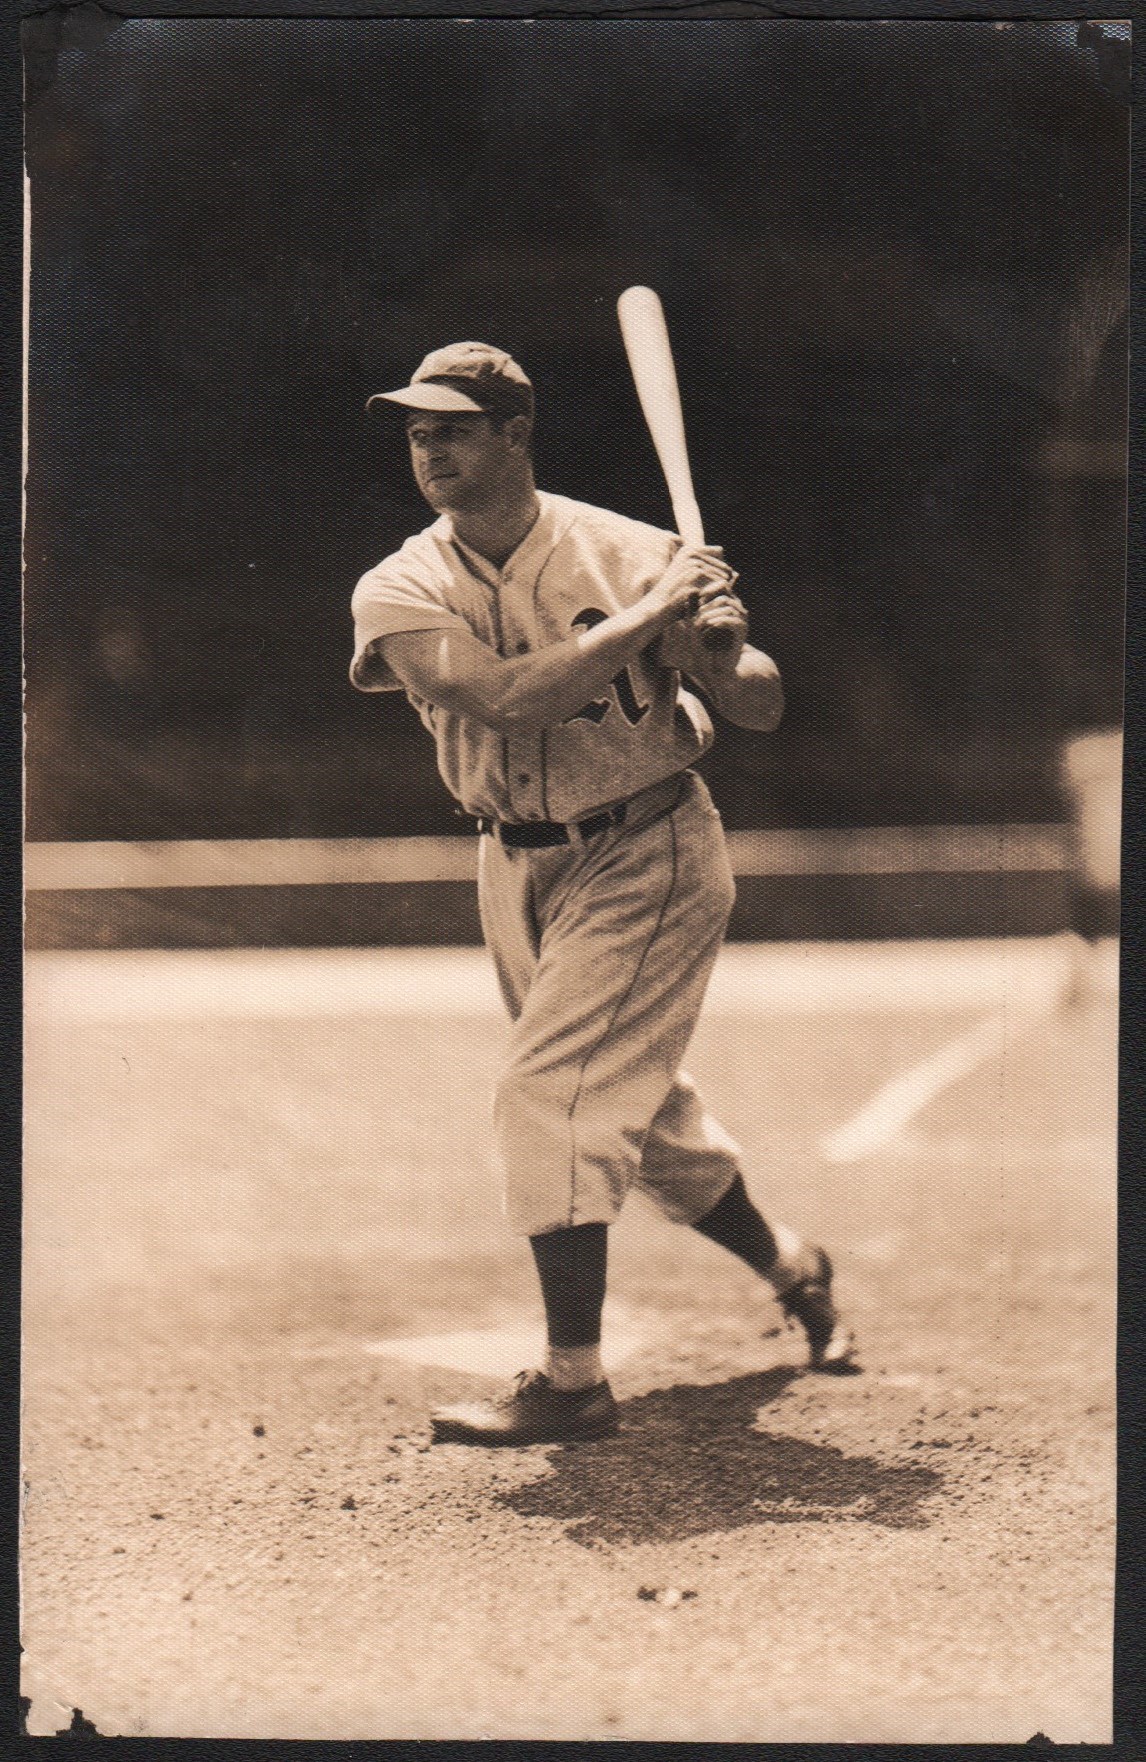 - 1930s Jimmie Foxx Type I Photograph by George Burke